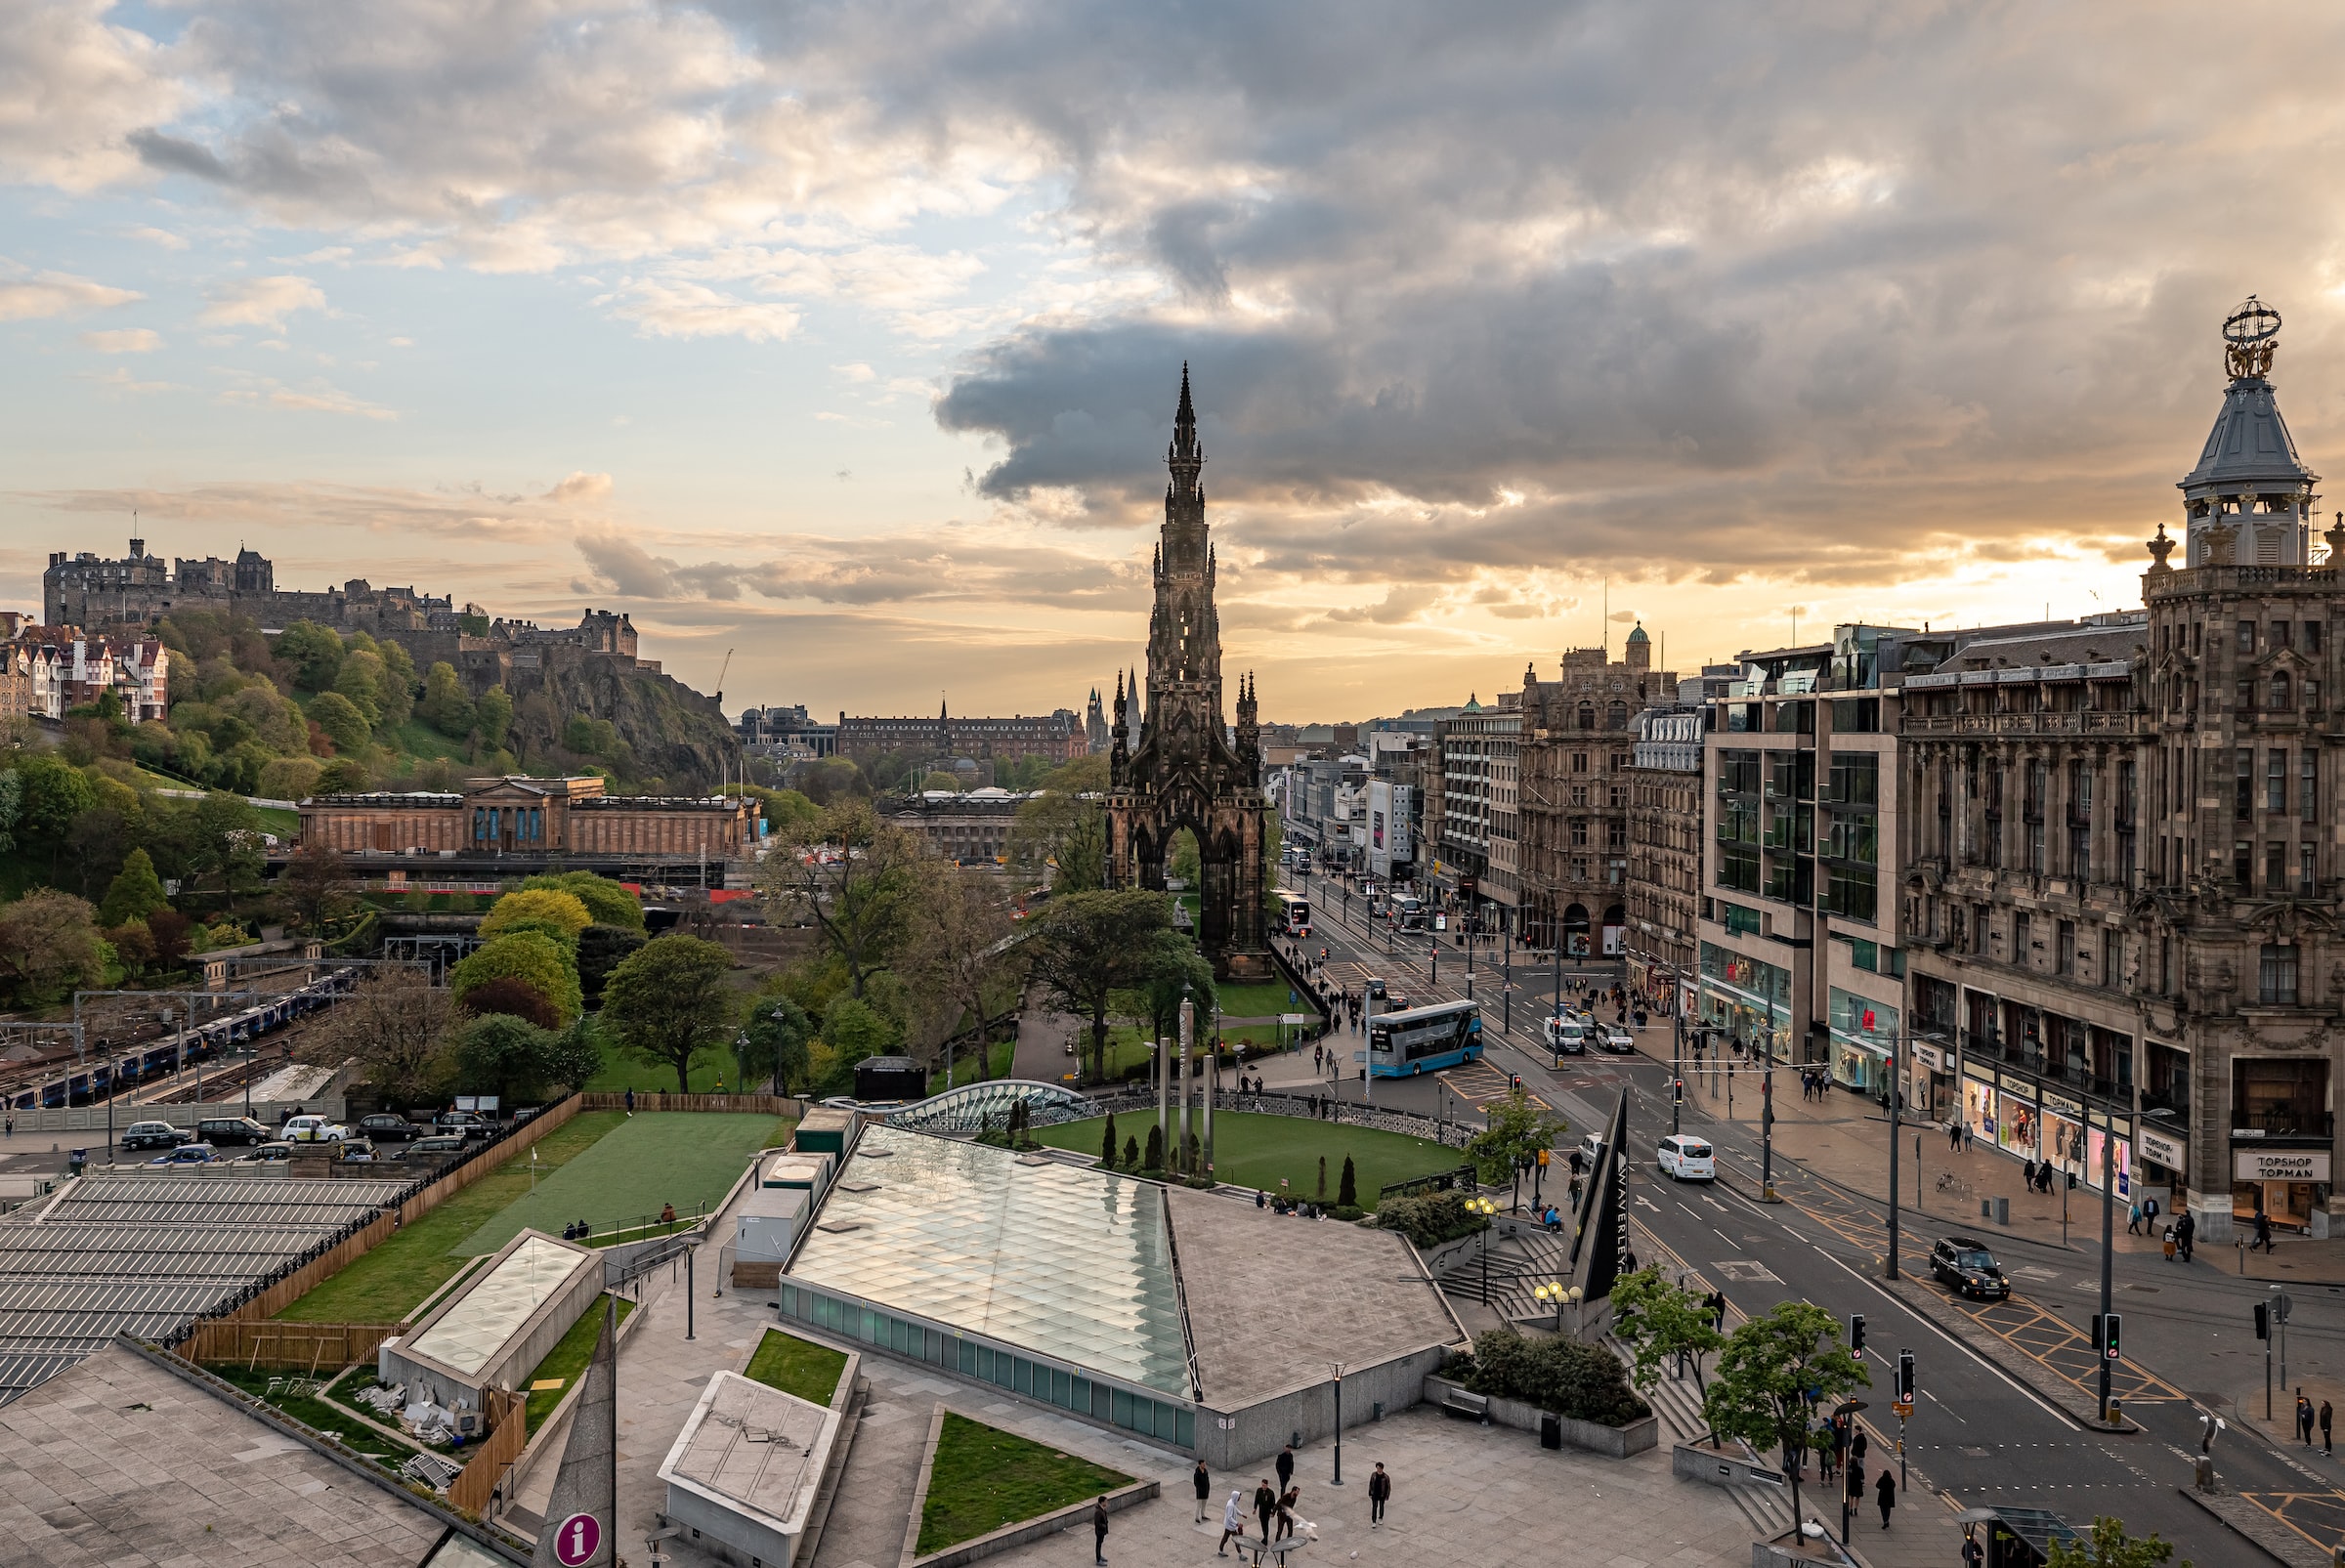 How Are Zero Carbon Heating Systems Helping Scotland Becoming Sustainable?